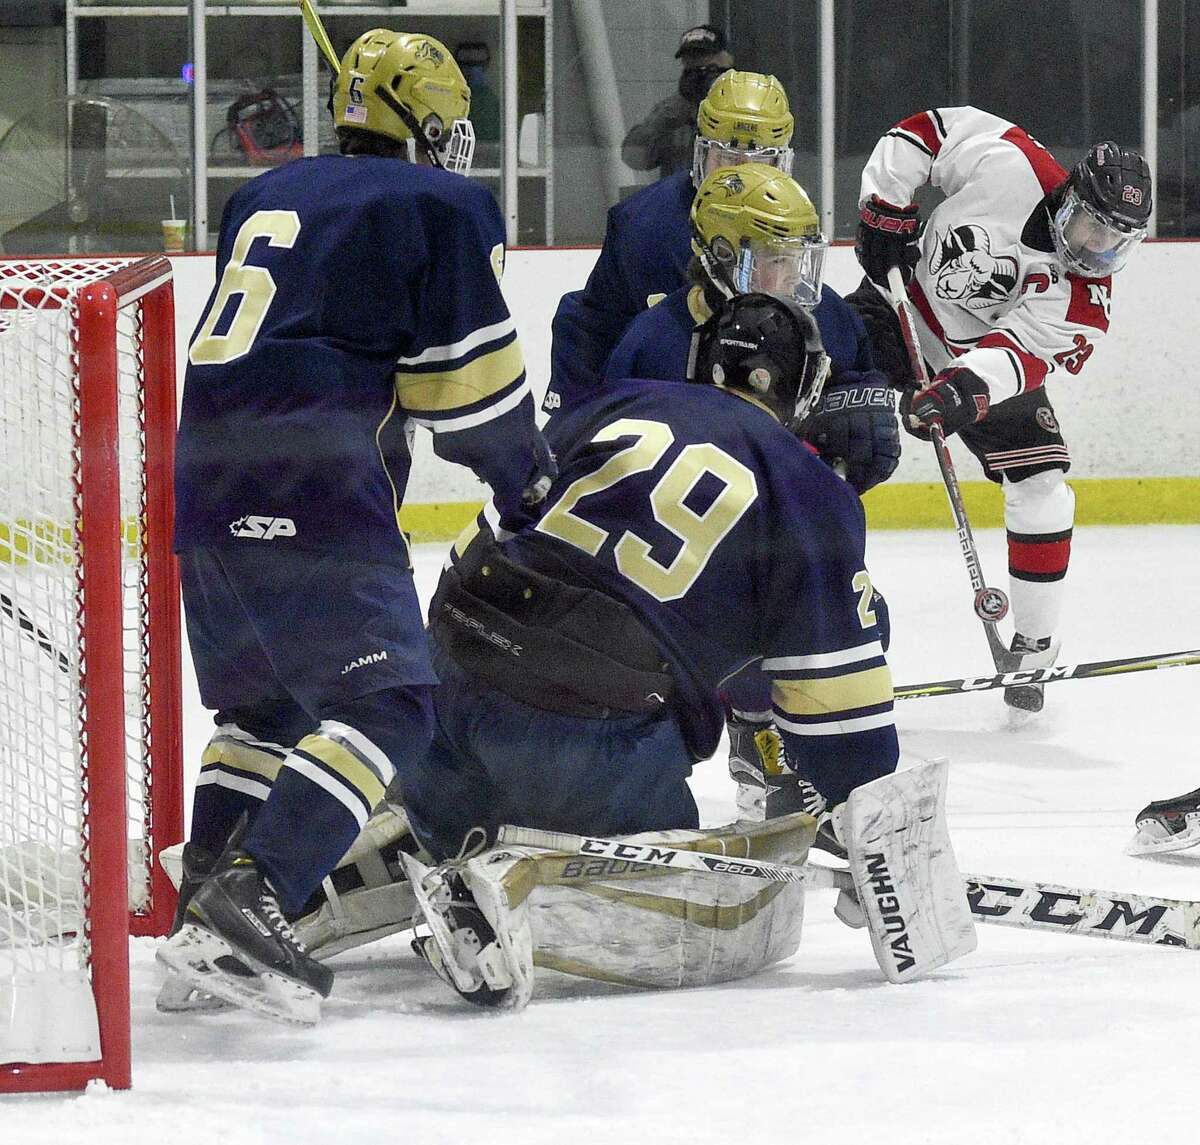 New Canaan Quinn McMahon (23) pops a shot in for a score against Notre Dame-Fairfield goalie Andrew Jones (29) in a FCIAC boys hockey game at the Darien Ice House in Darien, Conn. on Saturday, Jan. 20, 2018.